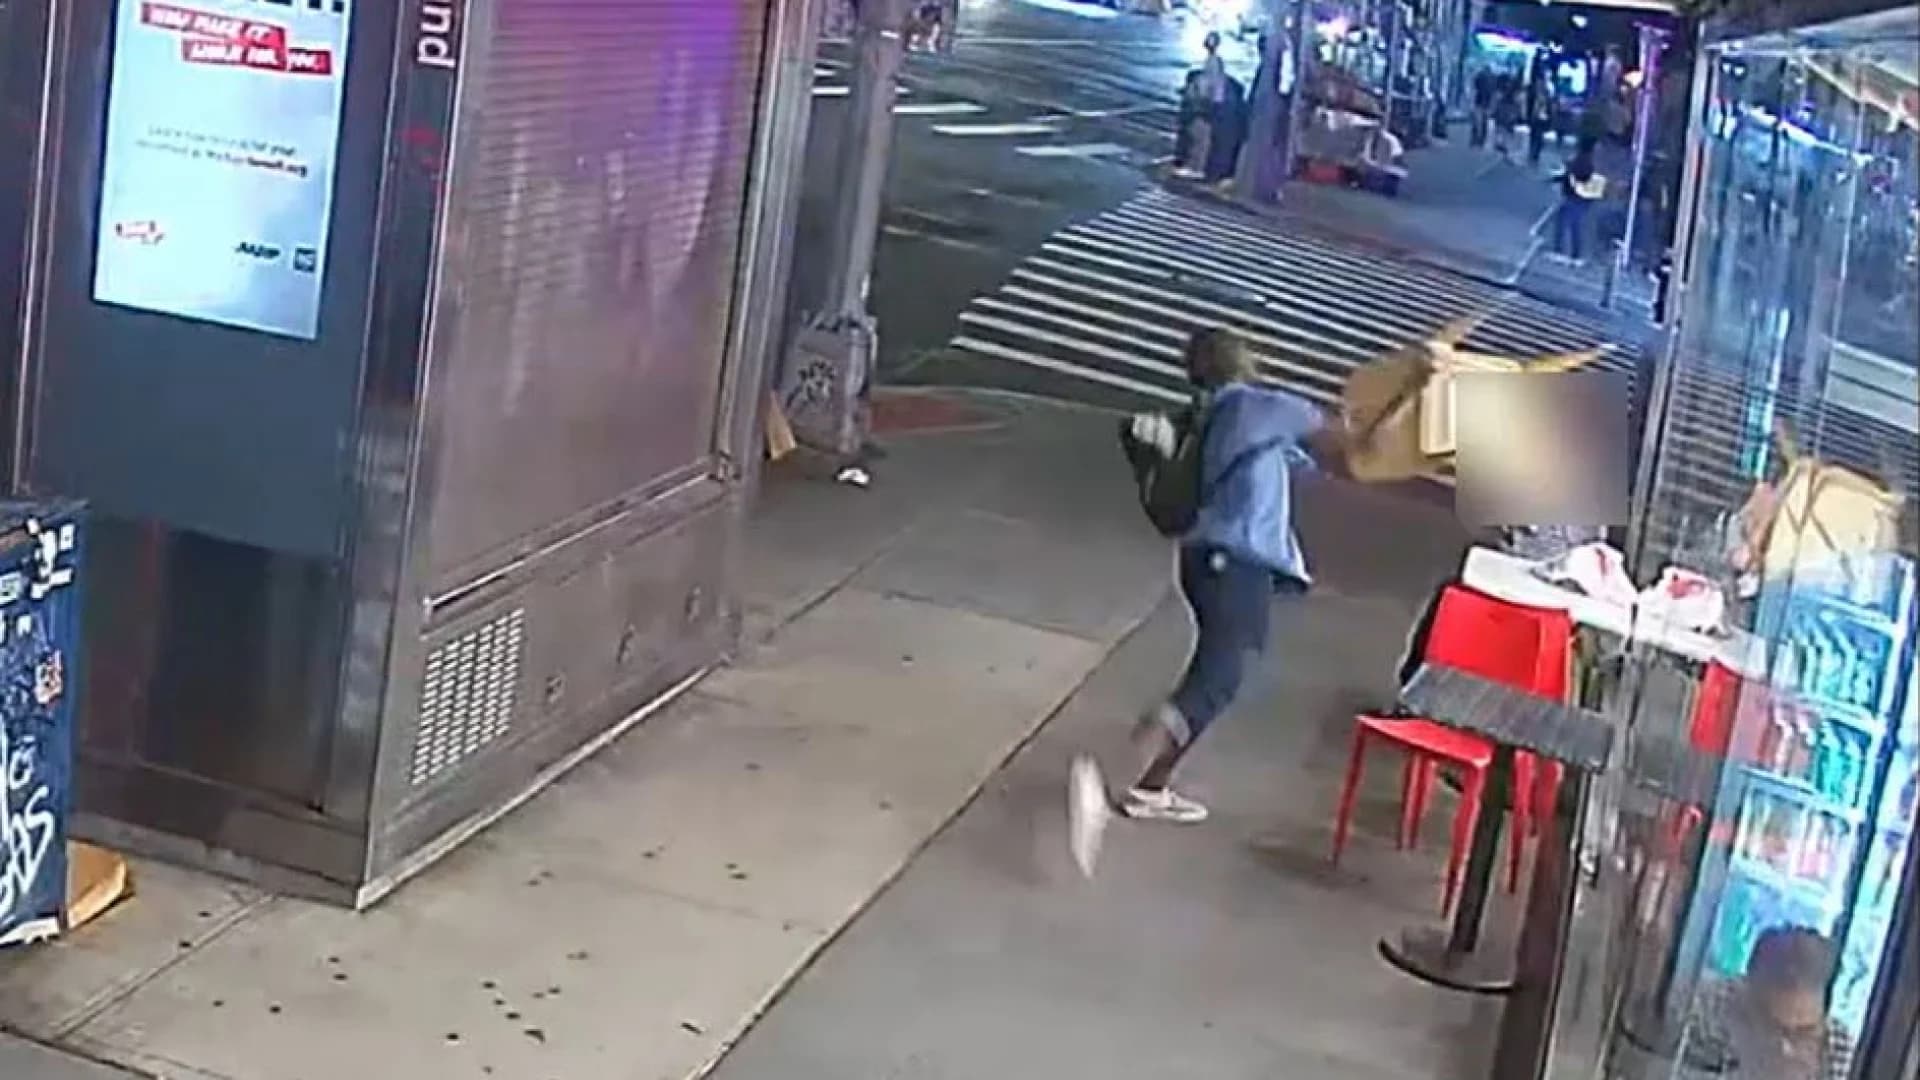 Police: Man throws chair at sitting victim, steals his phone in Midtown